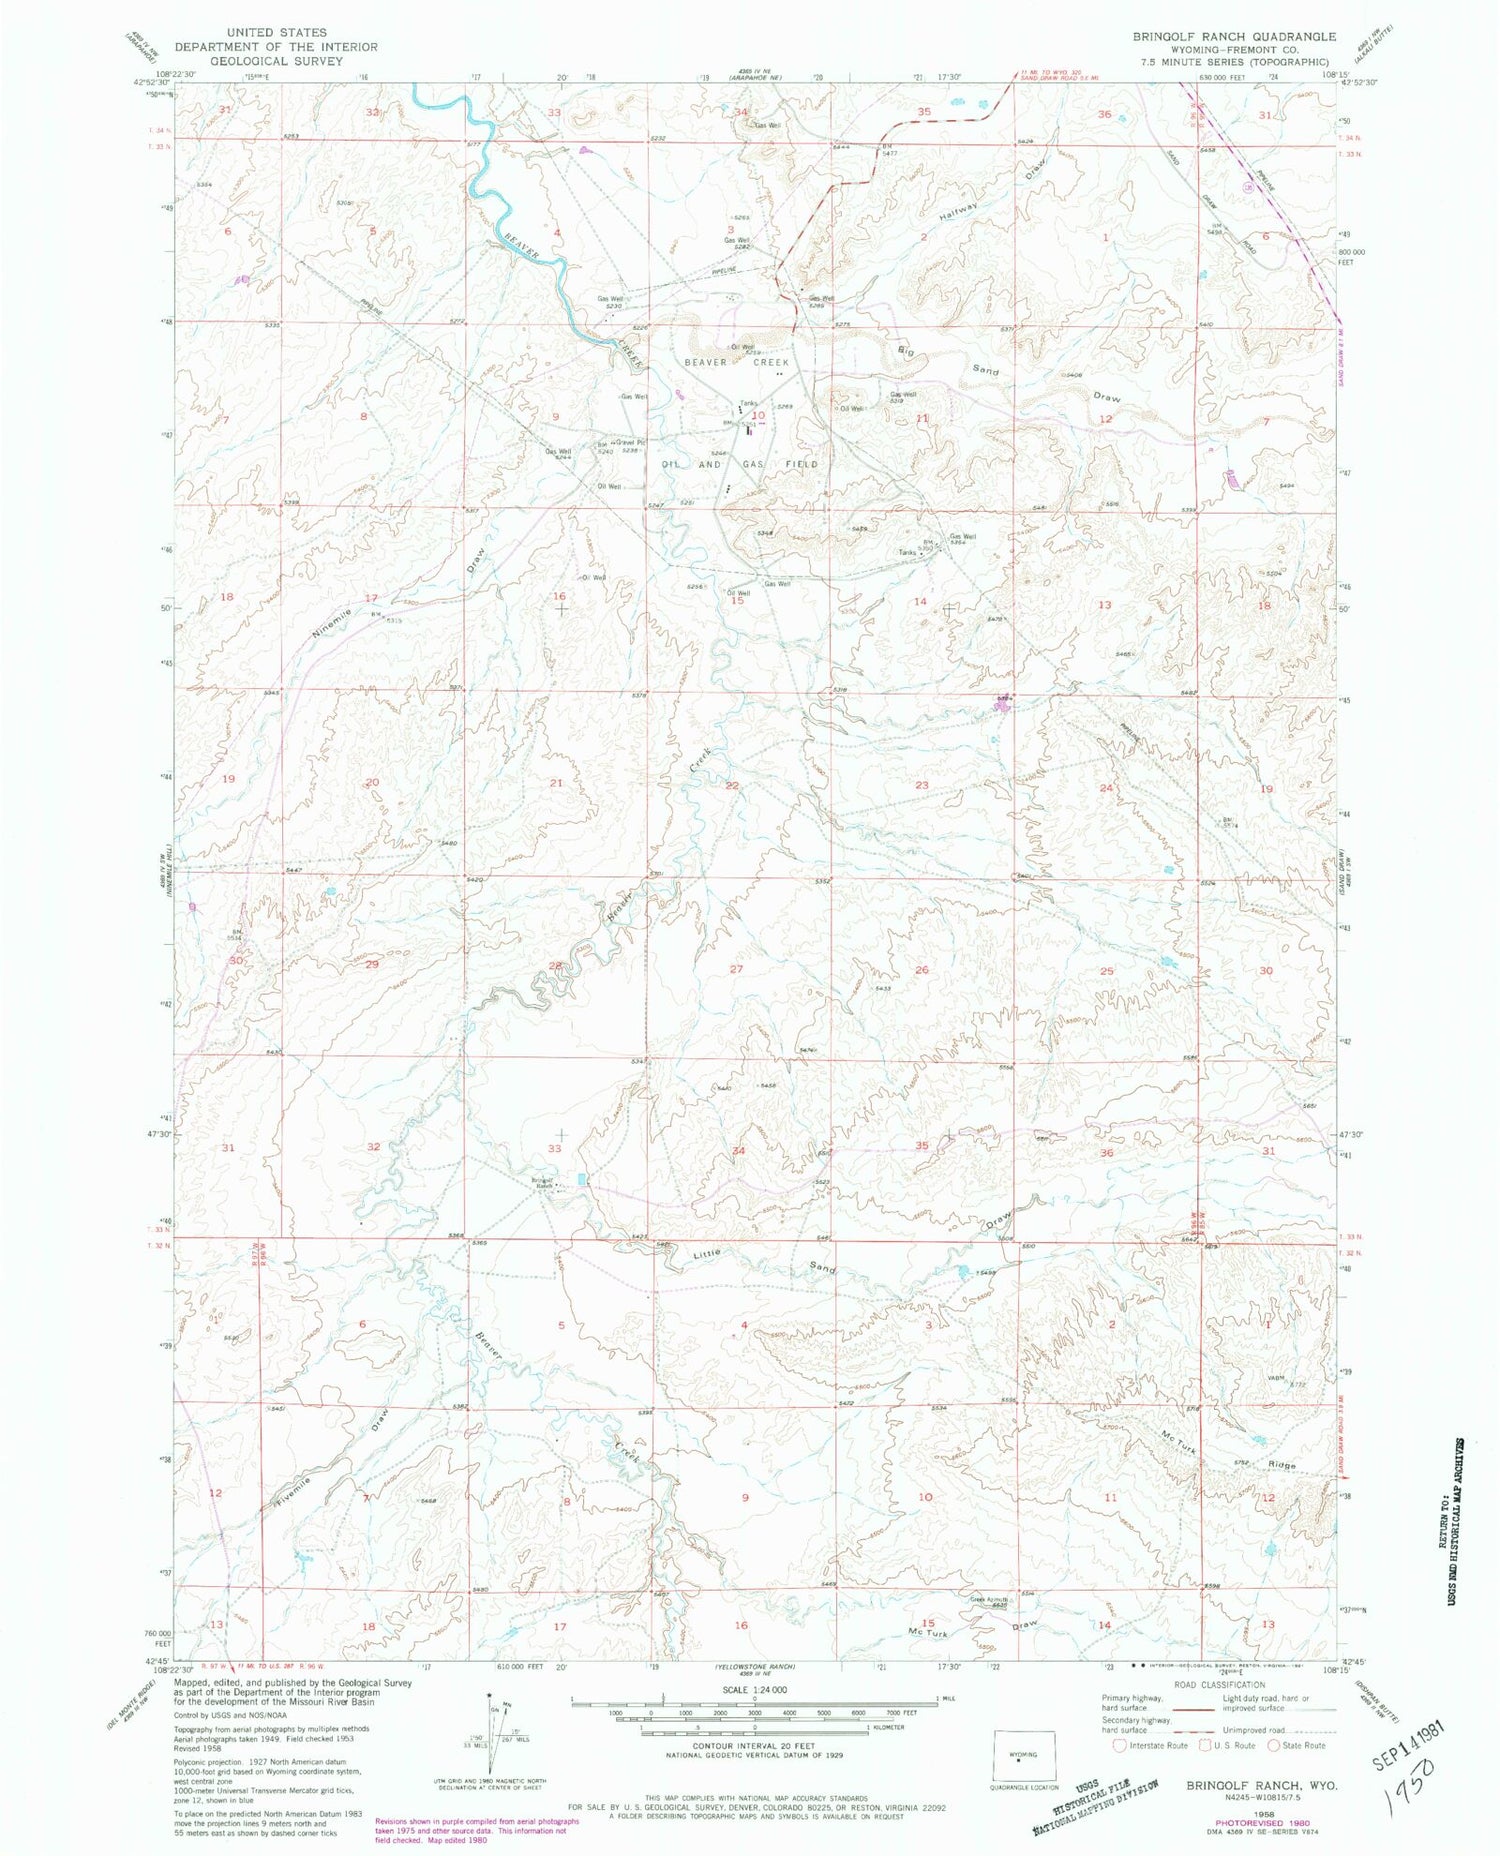 Classic USGS Bringolf Ranch Wyoming 7.5'x7.5' Topo Map Image